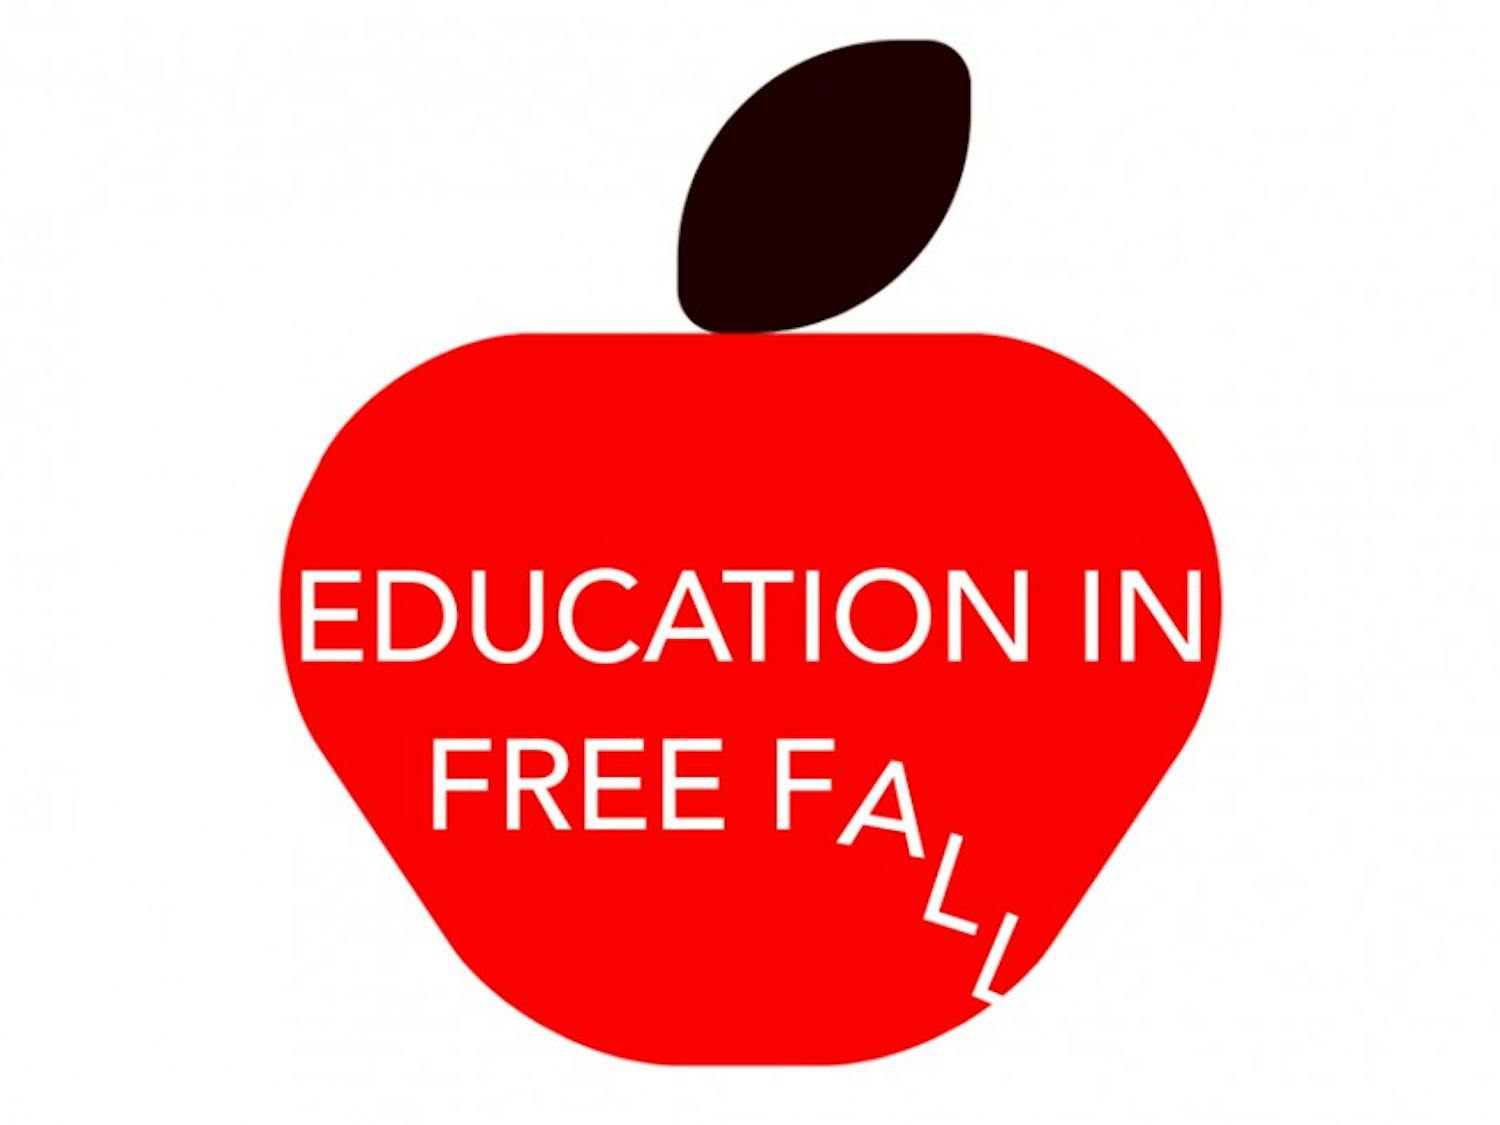 education_in_free_fall_graphic.jpg